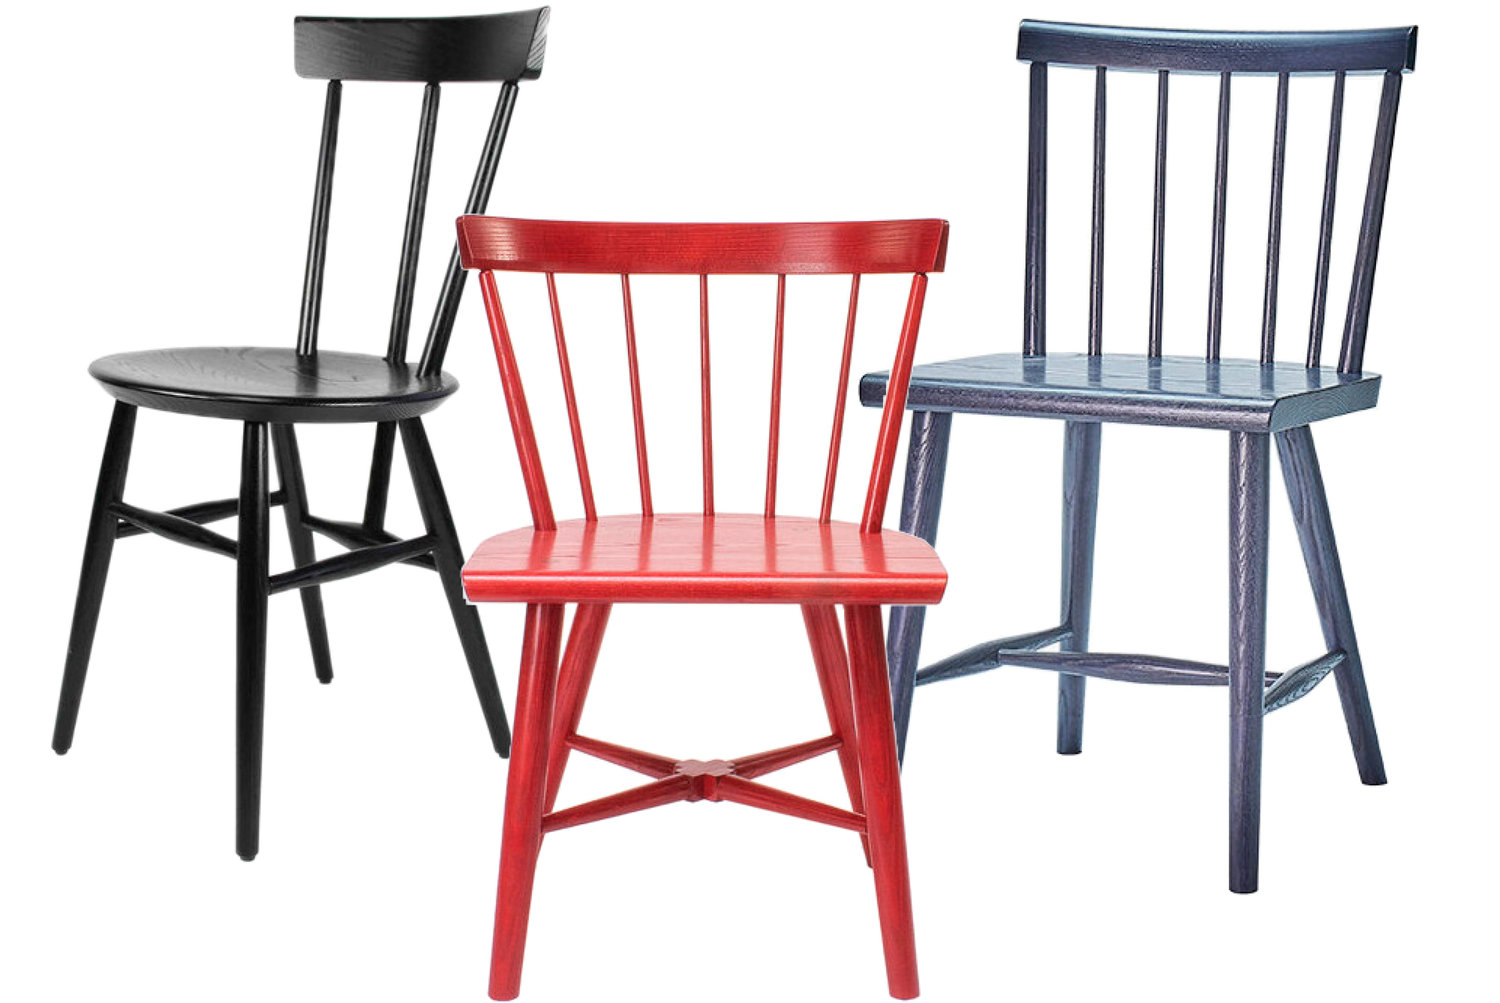 Sakonnet Café (black), Touisset (red) and Thames chairs from O&G Studio, Warren